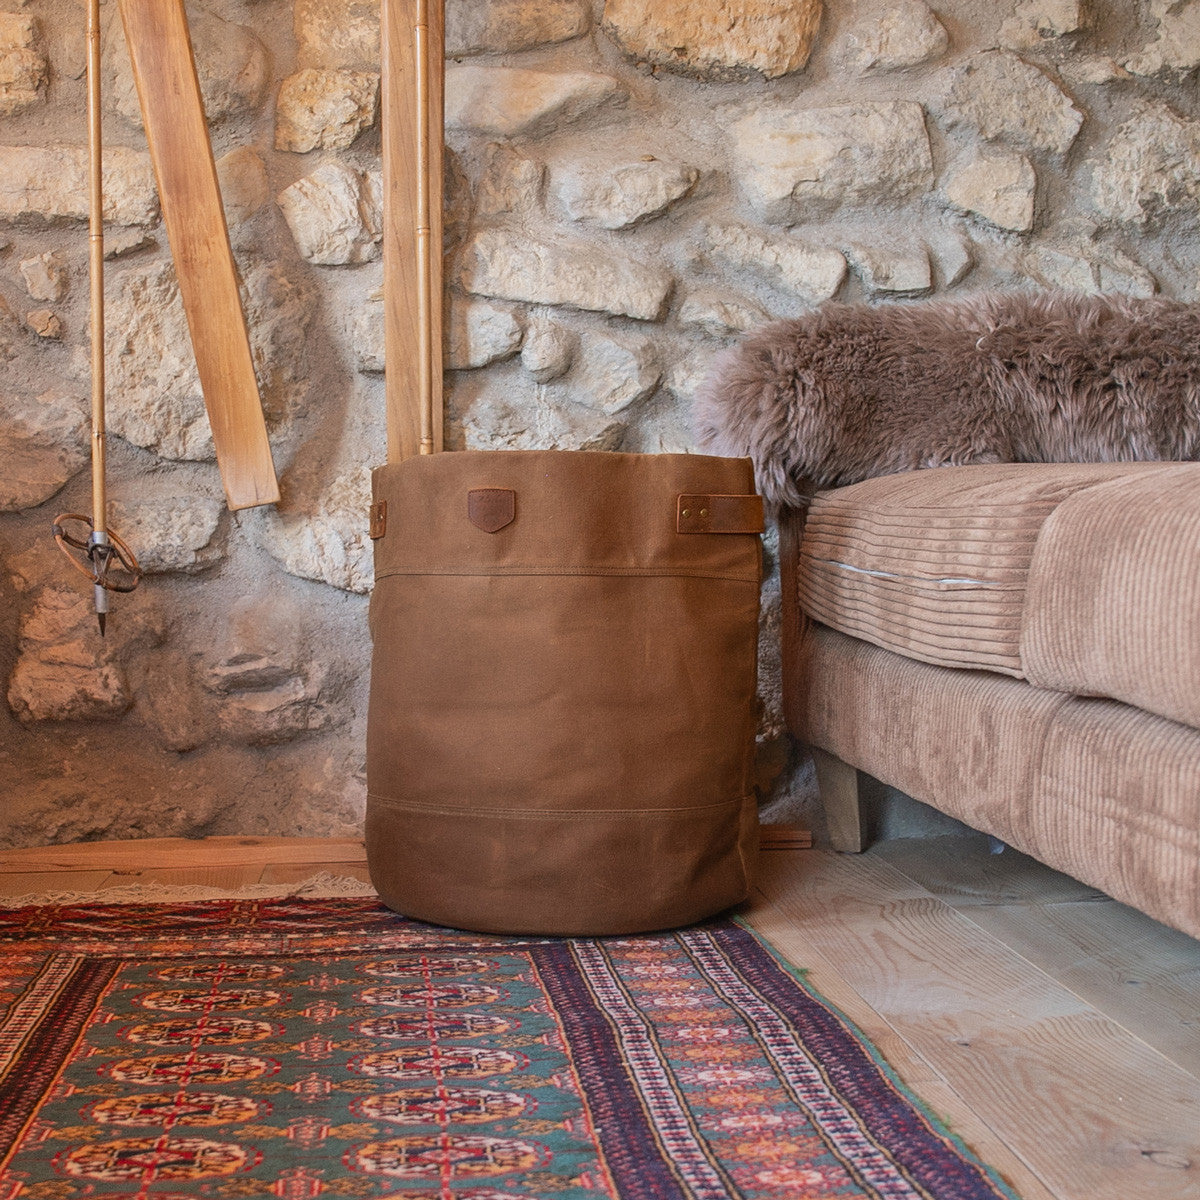 Waxed canvas storage shelter bag